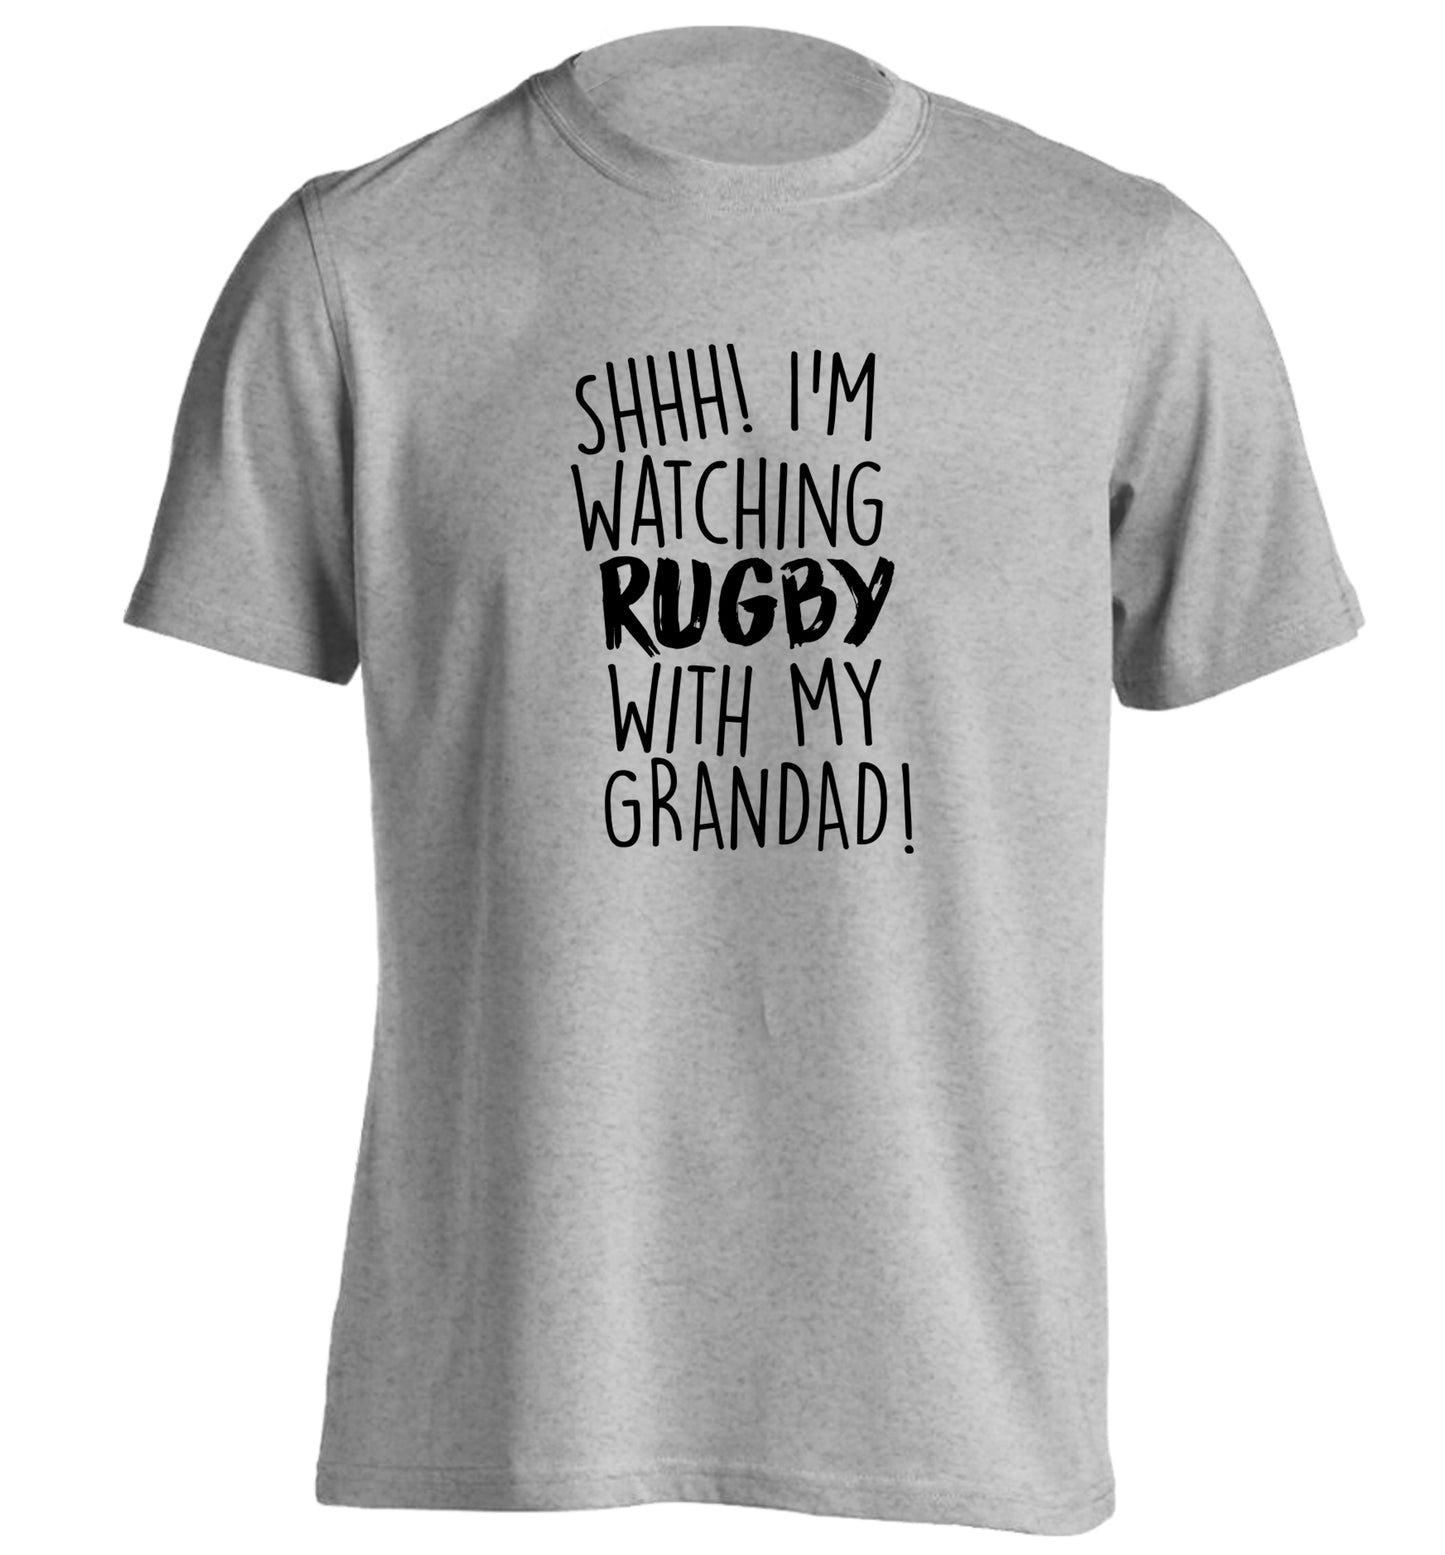 Shh I'm watching rugby with my grandaughter adults unisex grey Tshirt 2XL